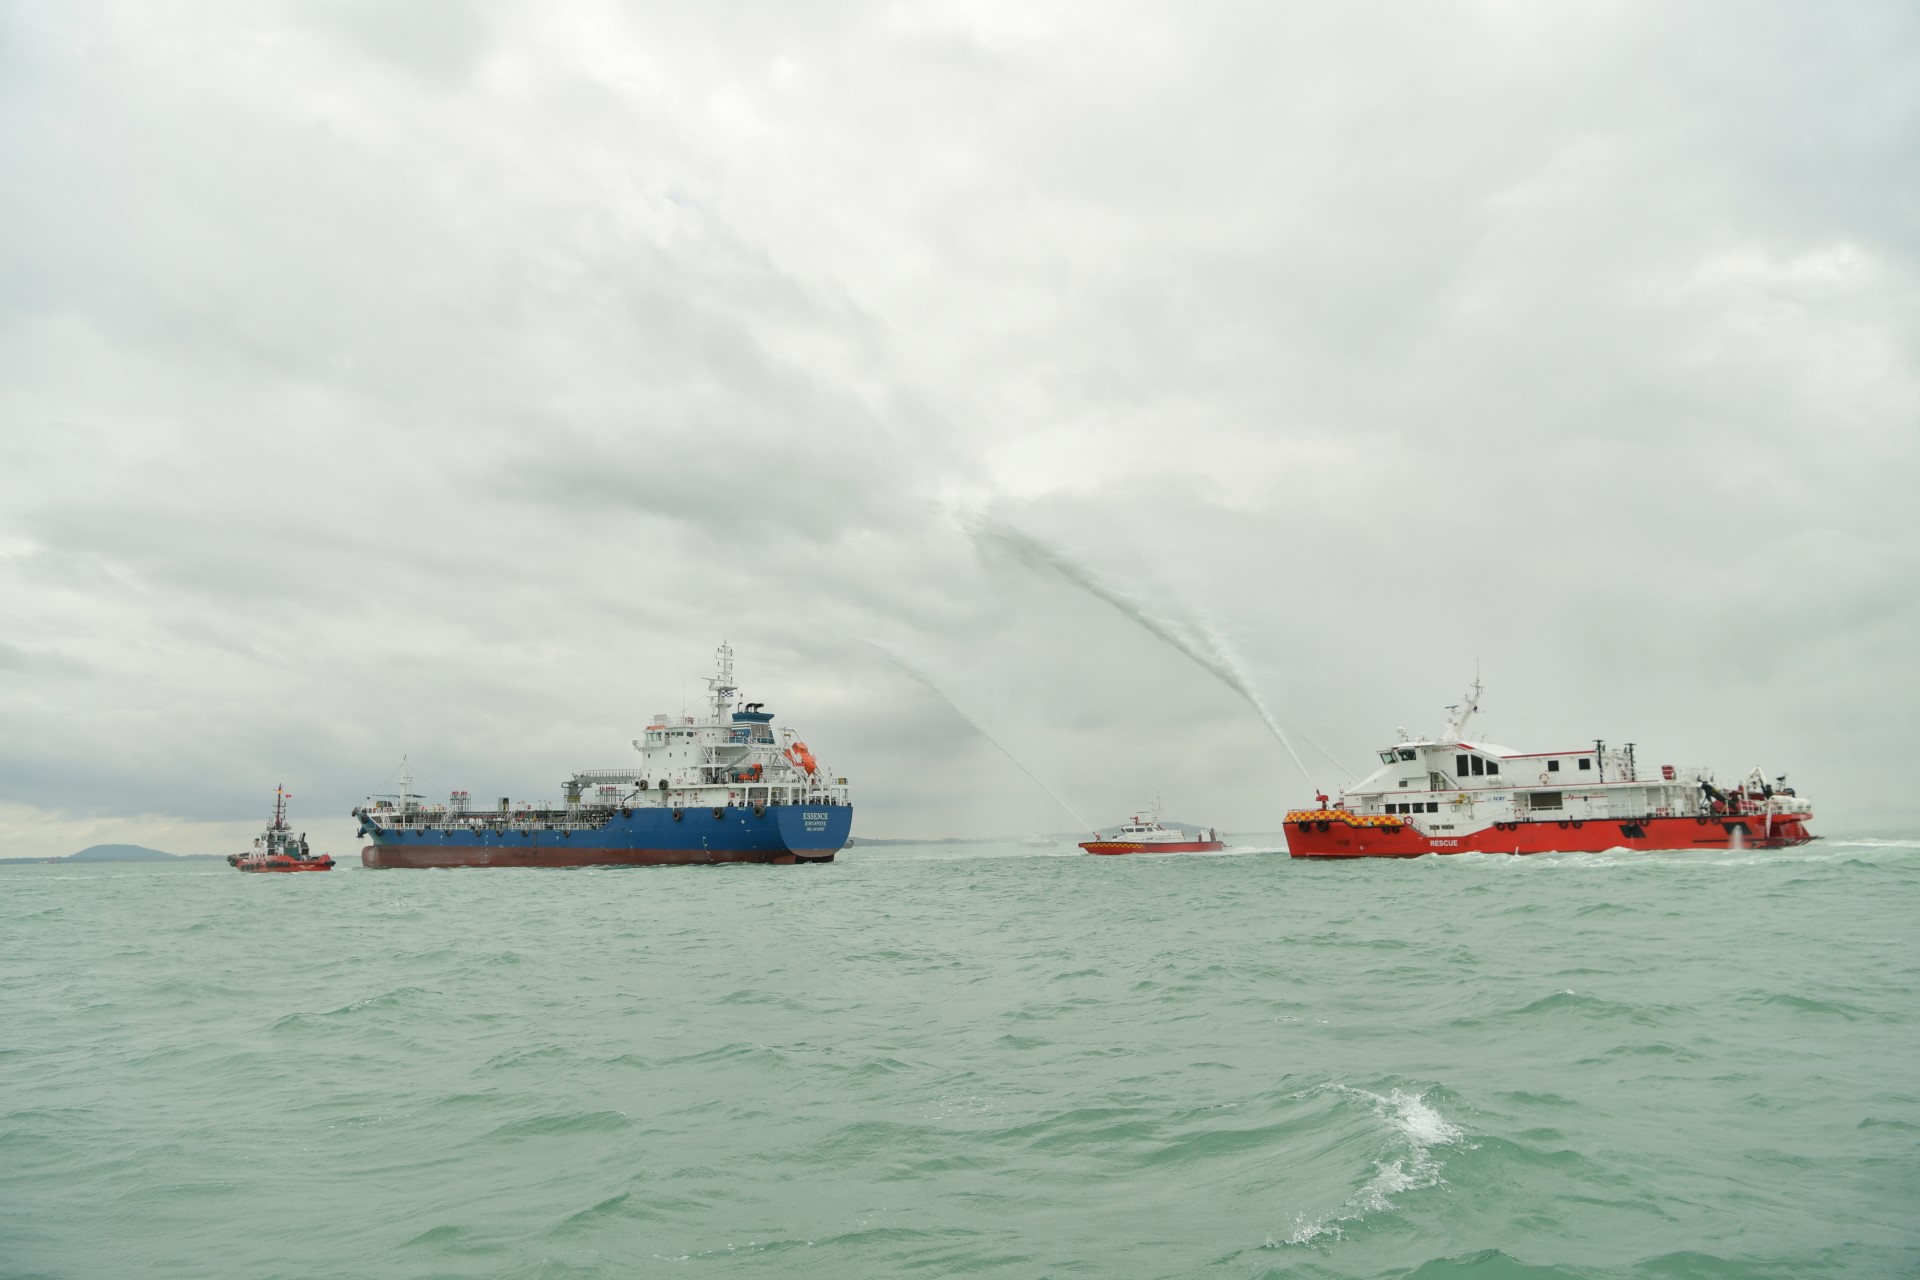 The Singapore Civil Defence Force's fire-fighting vessels are deployed to the scene to extinguish the simulated fire that broke out on board the 'hijacked' vessel.